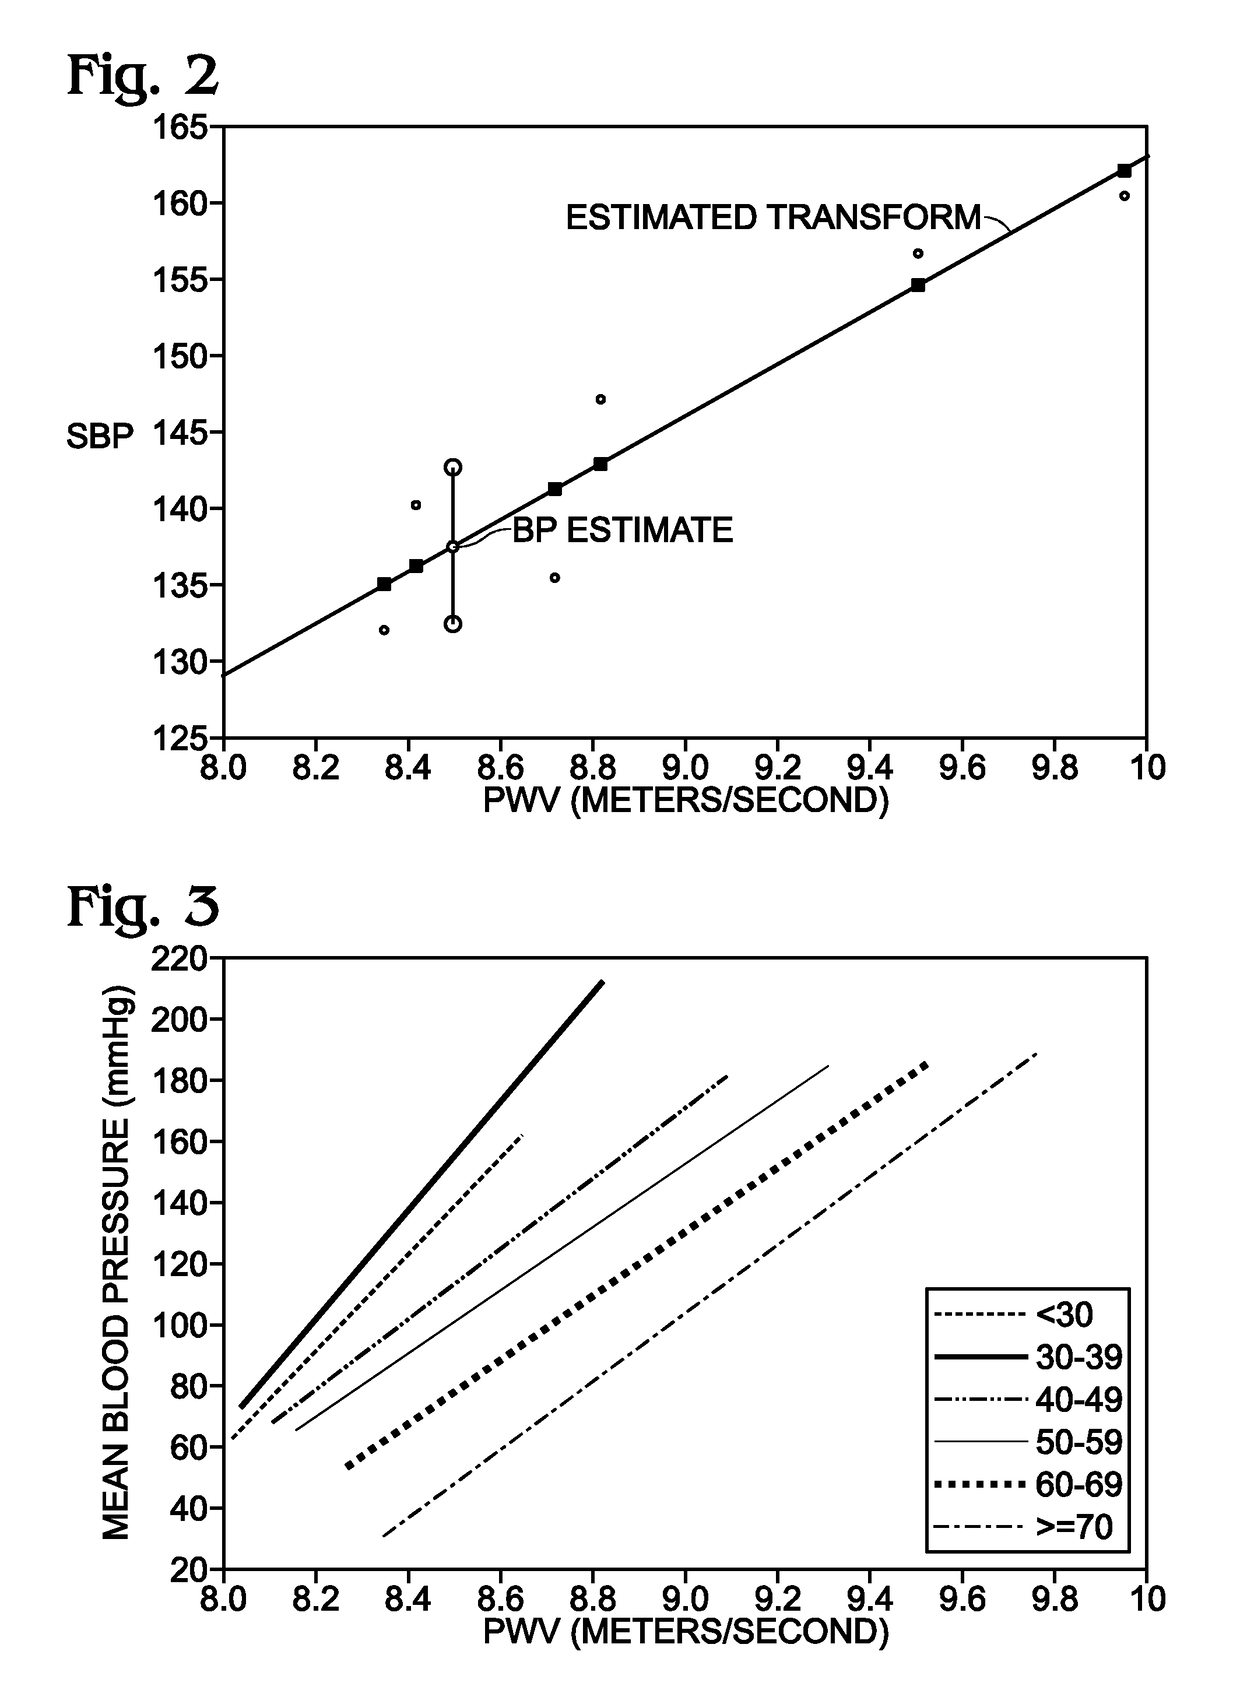 System and Method for Deriving a Pulse Wave Velocity-Blood pressure Transform